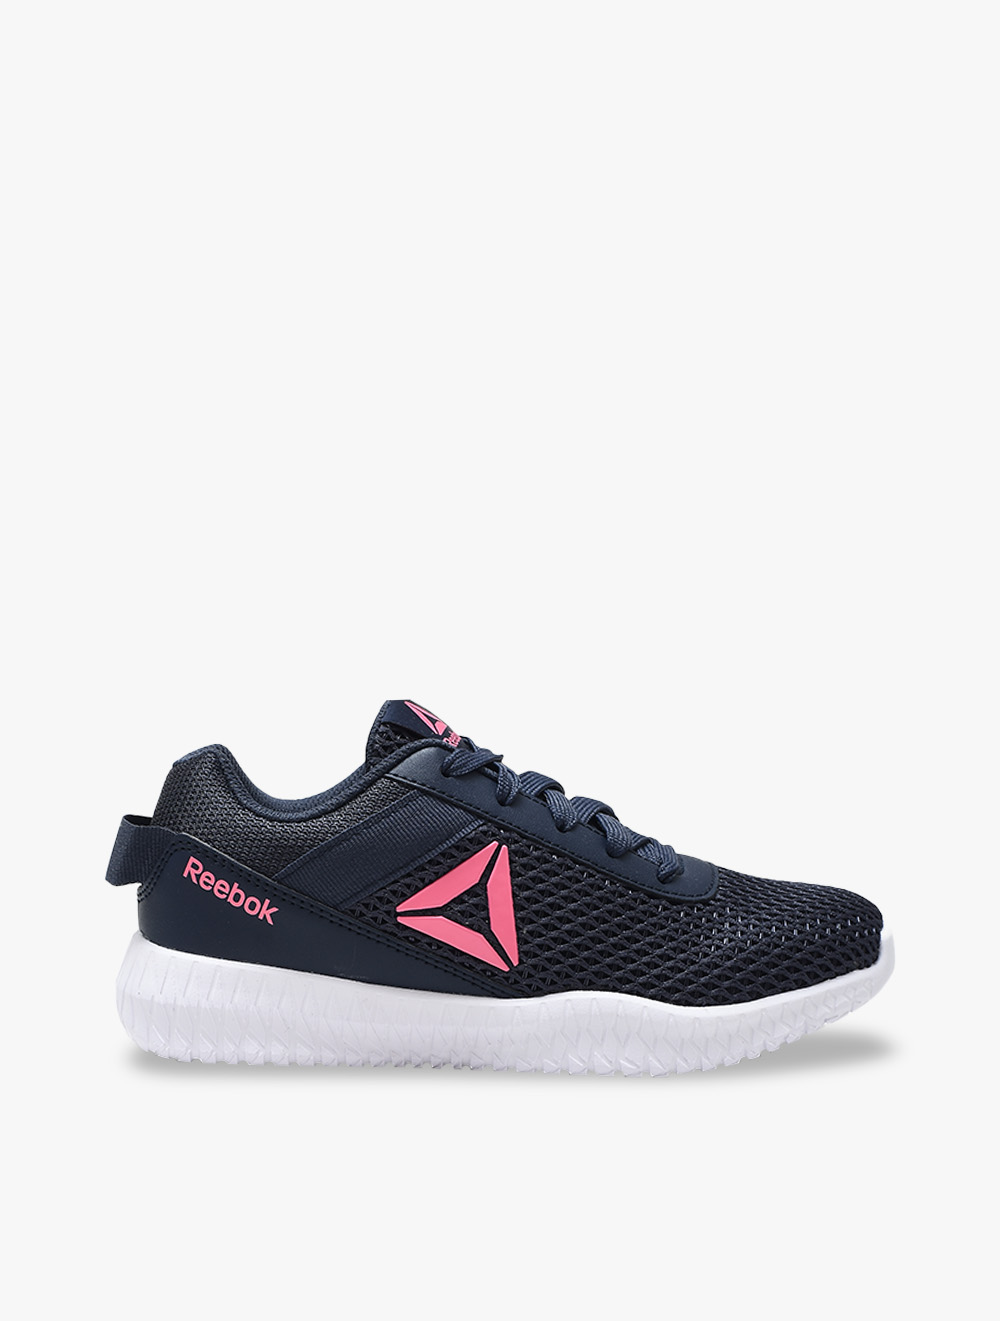 Shop The Latest Shoes From Reebok in 